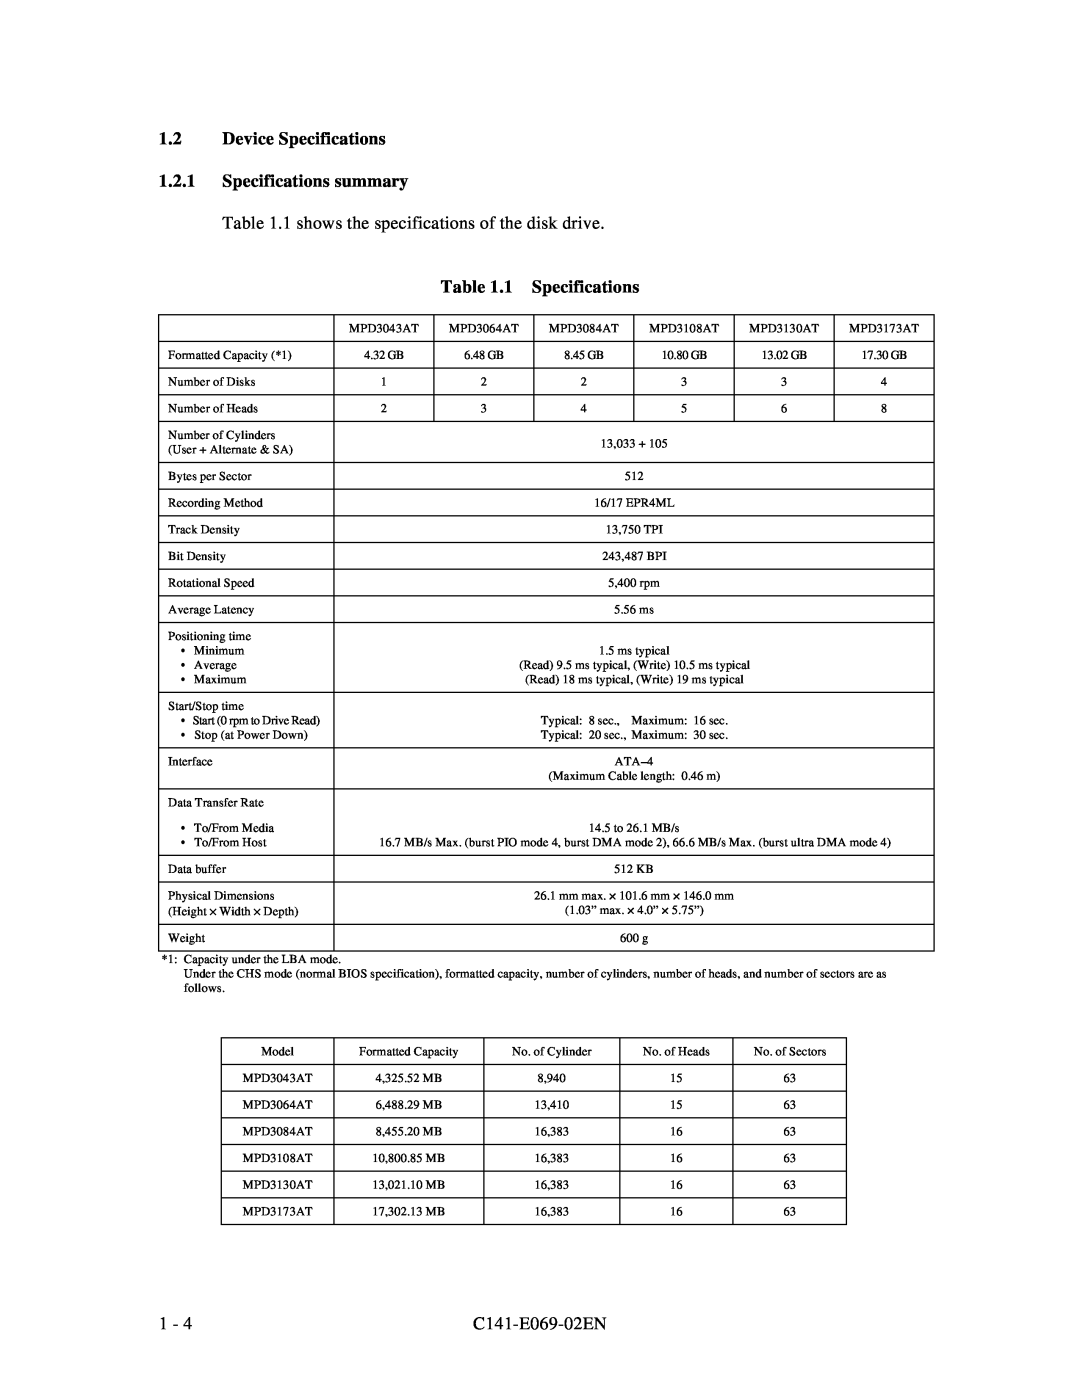 Fujitsu MPD3XXXAT manual Device Specifications 1.2.1 Specifications summary, 1 shows the specifications of the disk drive 